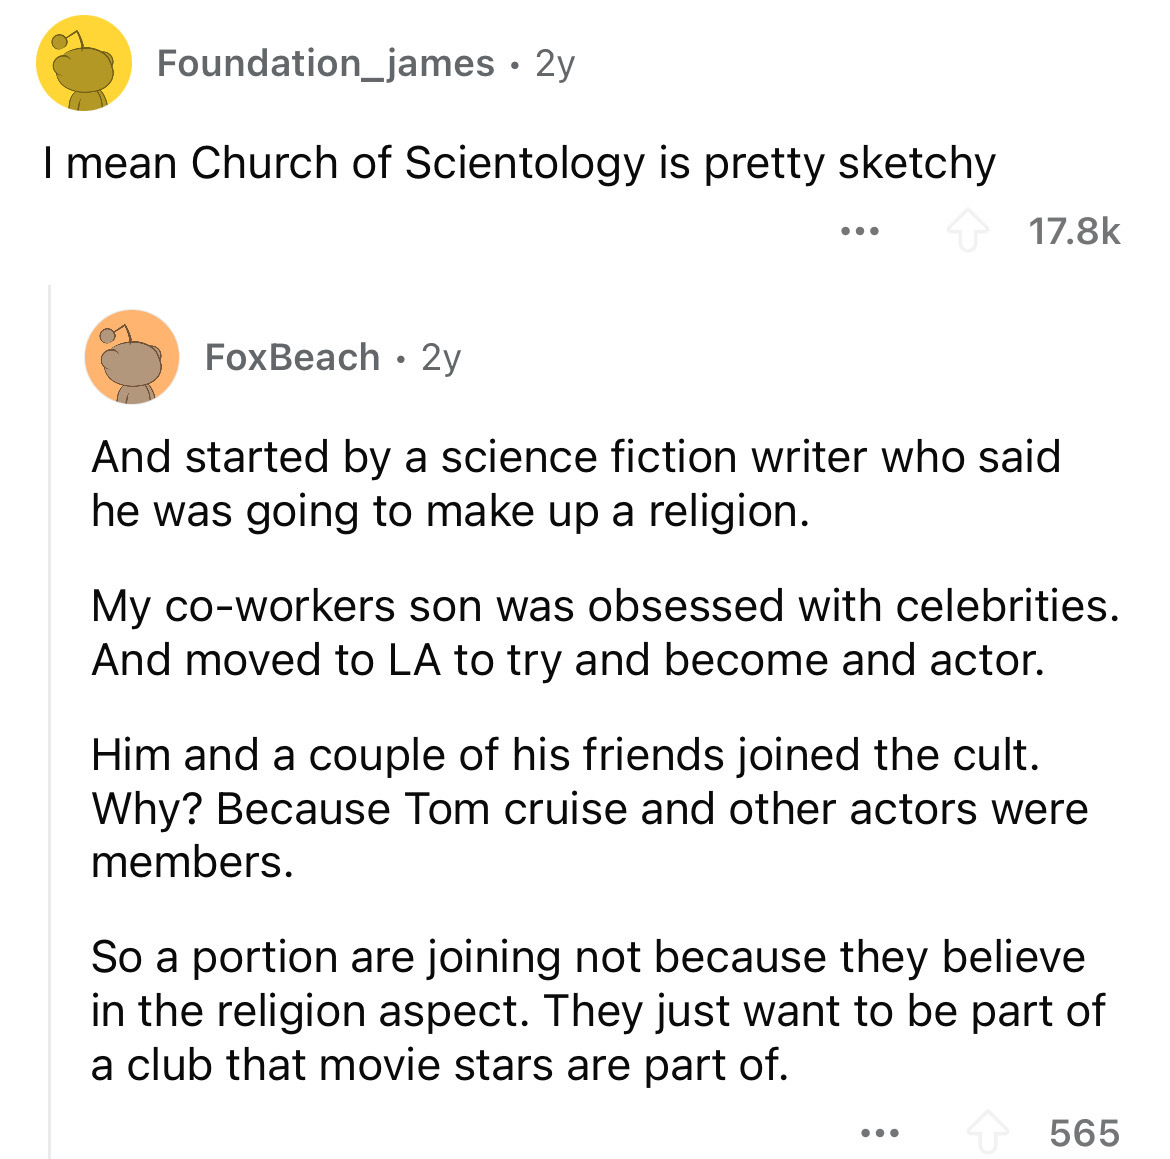 document - Foundation_james 2y I mean Church of Scientology is pretty sketchy Fox Beach 2y . ... And started by a science fiction writer who said he was going to make up a religion. My coworkers son was obsessed with celebrities. And moved to La to try an